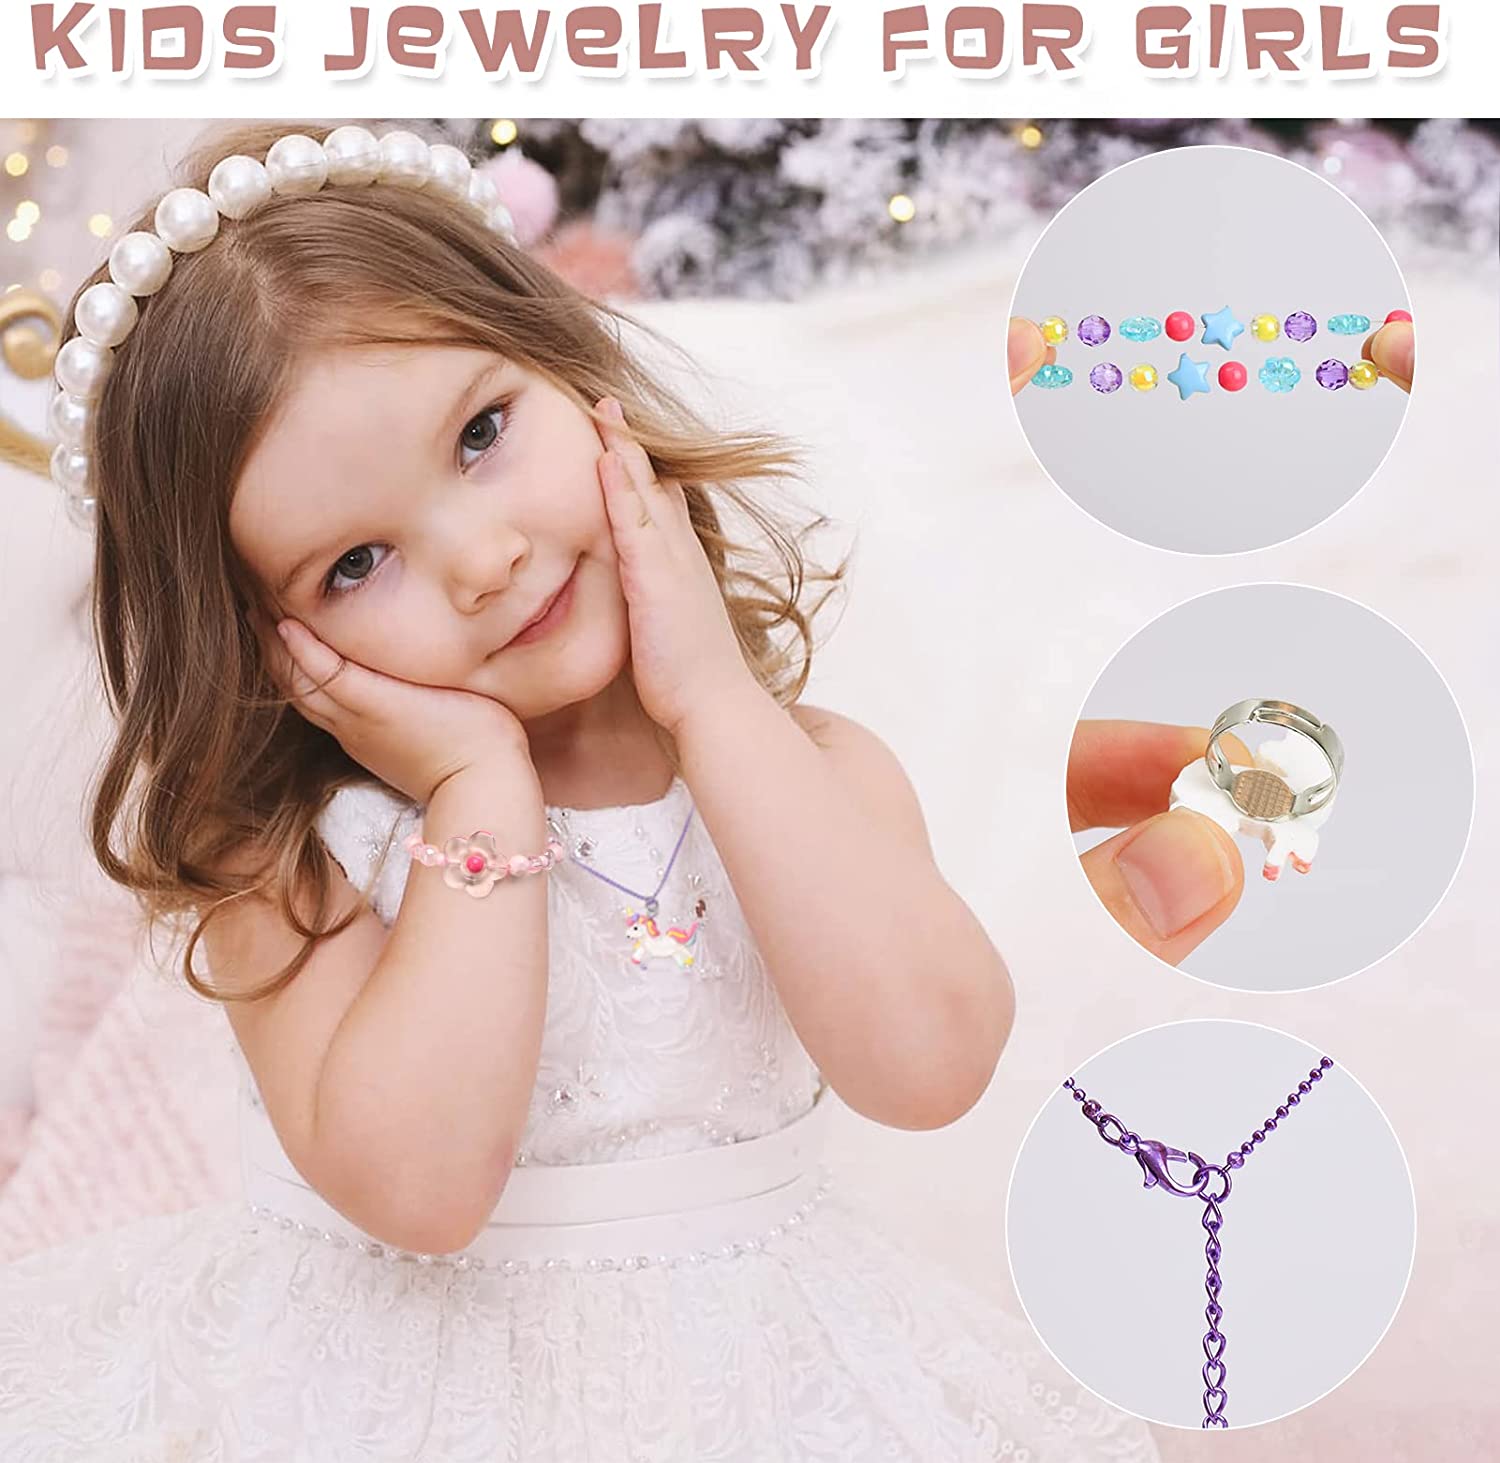 Sytle-carry 19 Pcs Kids Jewelry for Girls, Toddlers Necklaces Bracelets and Rings Set, Cute Charm Play Jewelry Set, Toys for Girls 3-6 Years, Kids